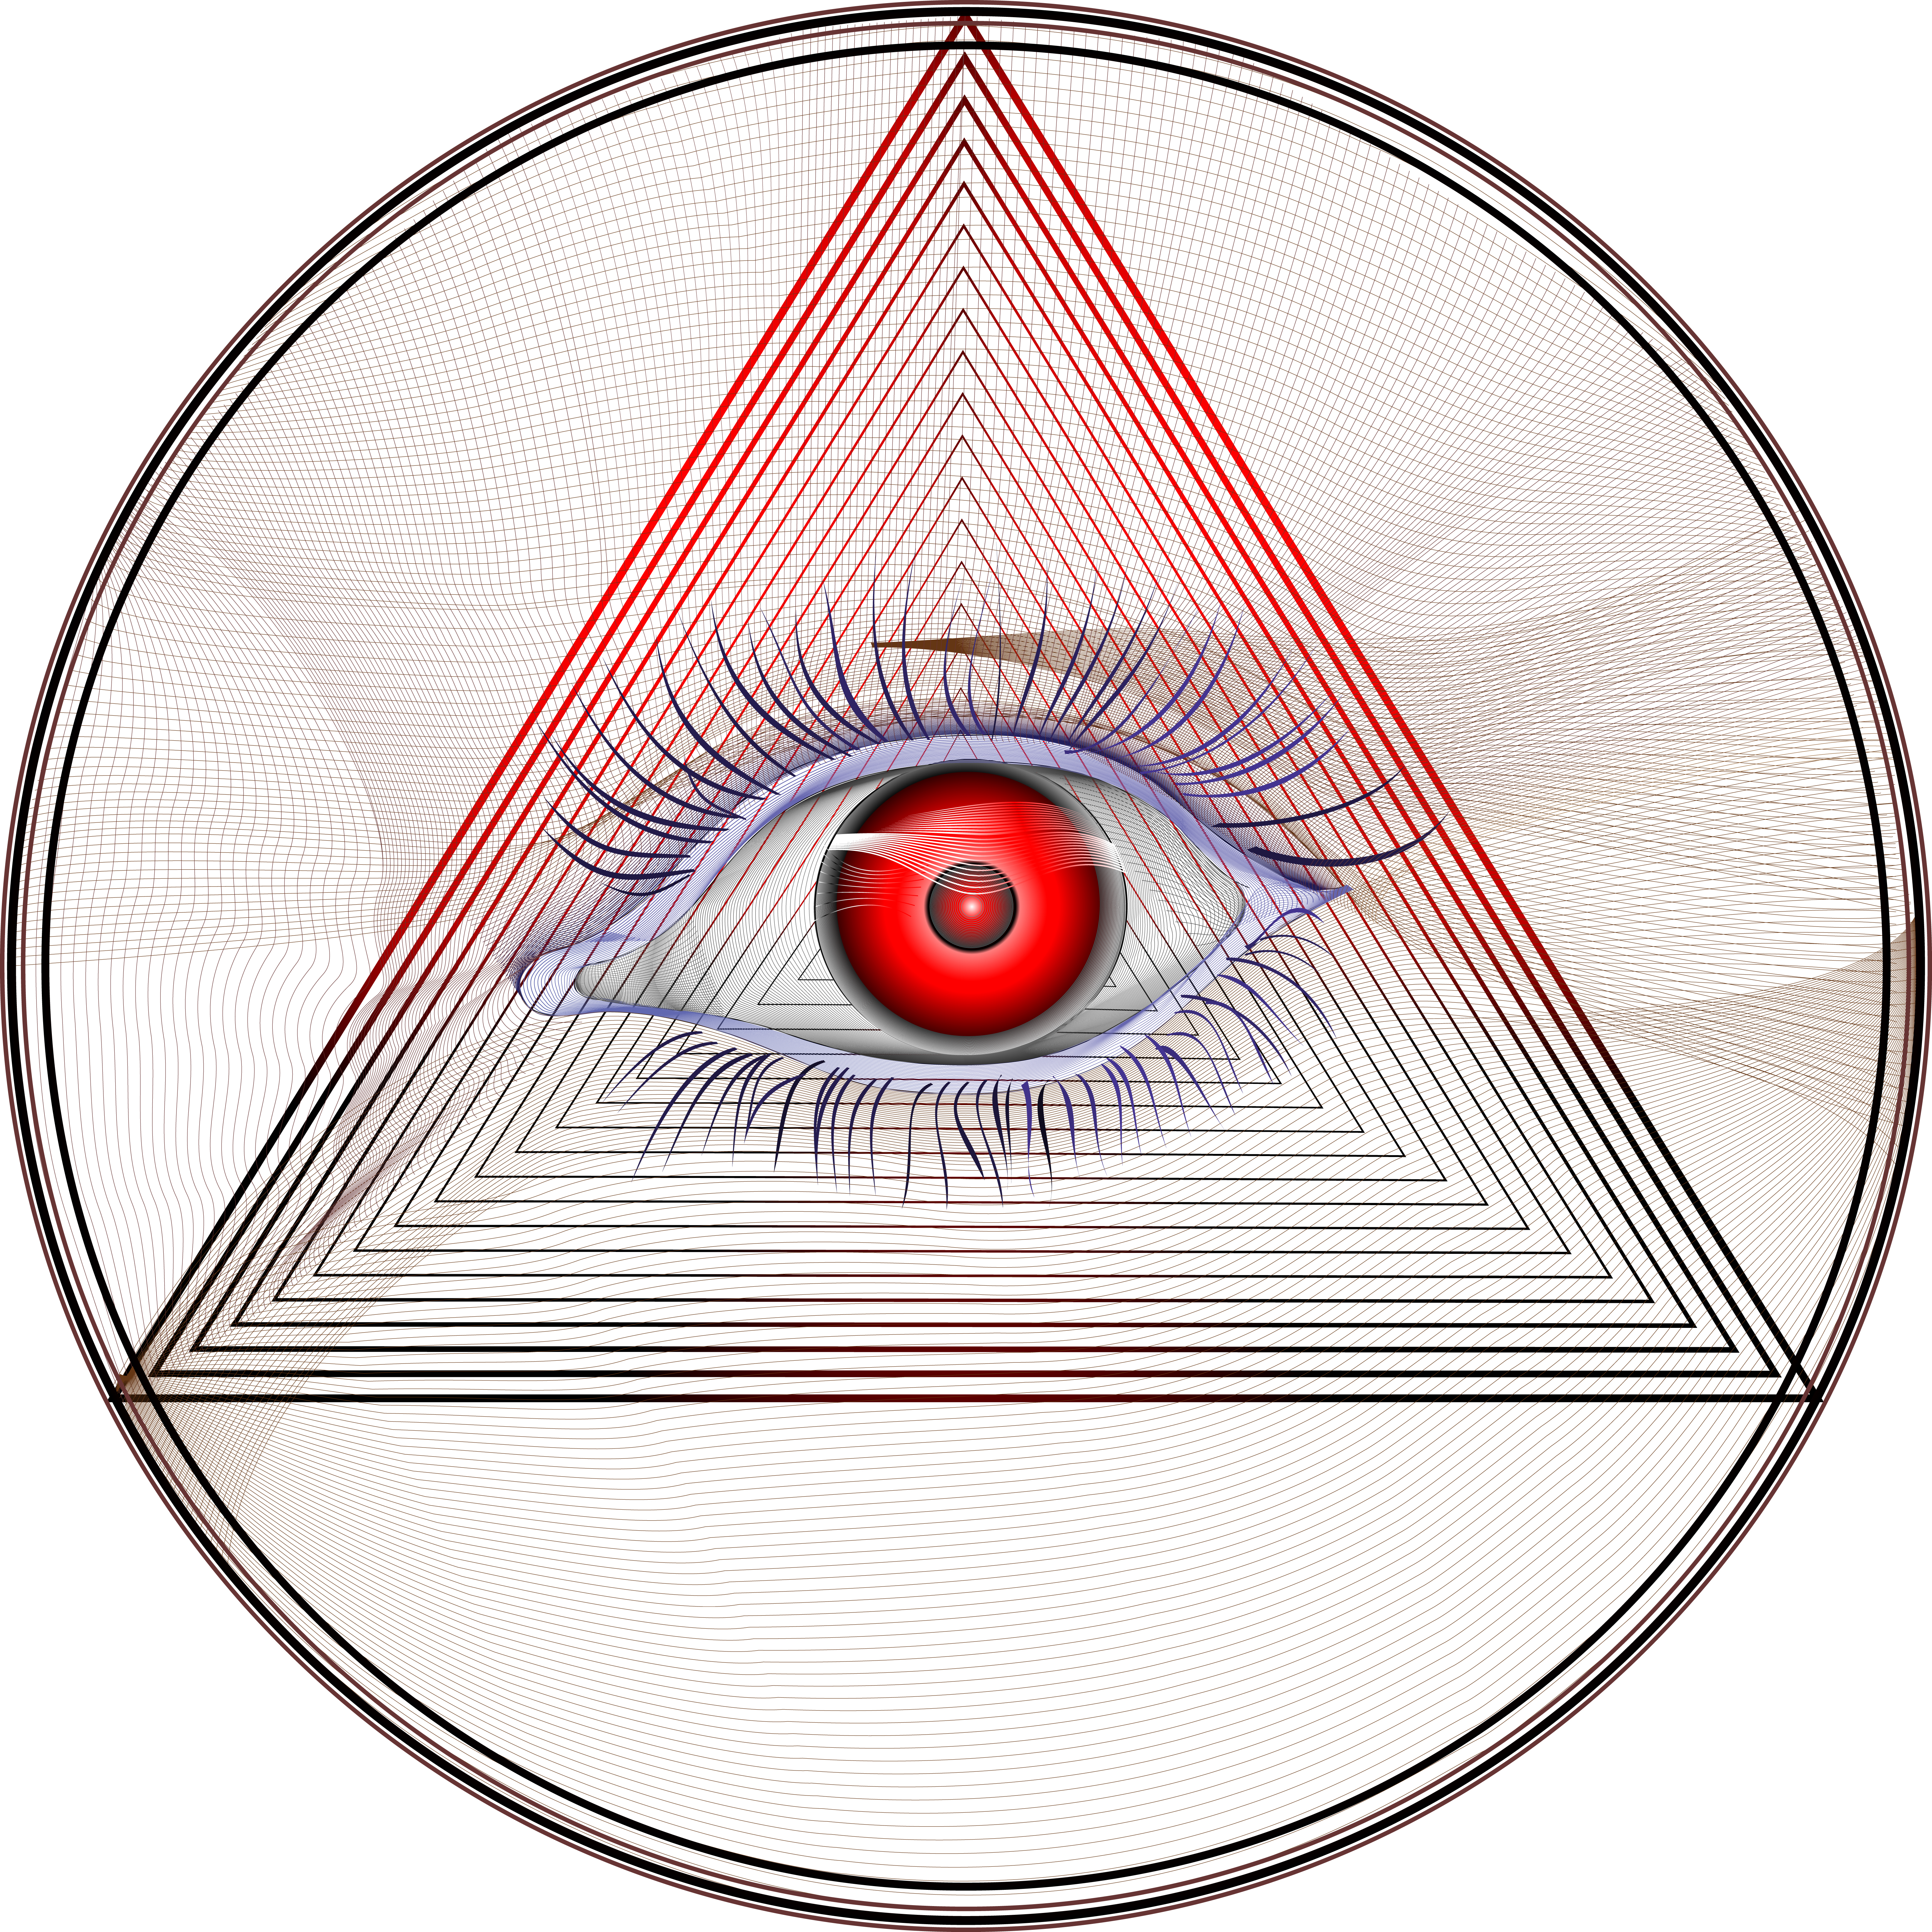 Hypnosis. Hypnotic eyes of eternity for relaxation, meditation, <br />Copyright by Art1art at Dreamstime.com-ID 34386151